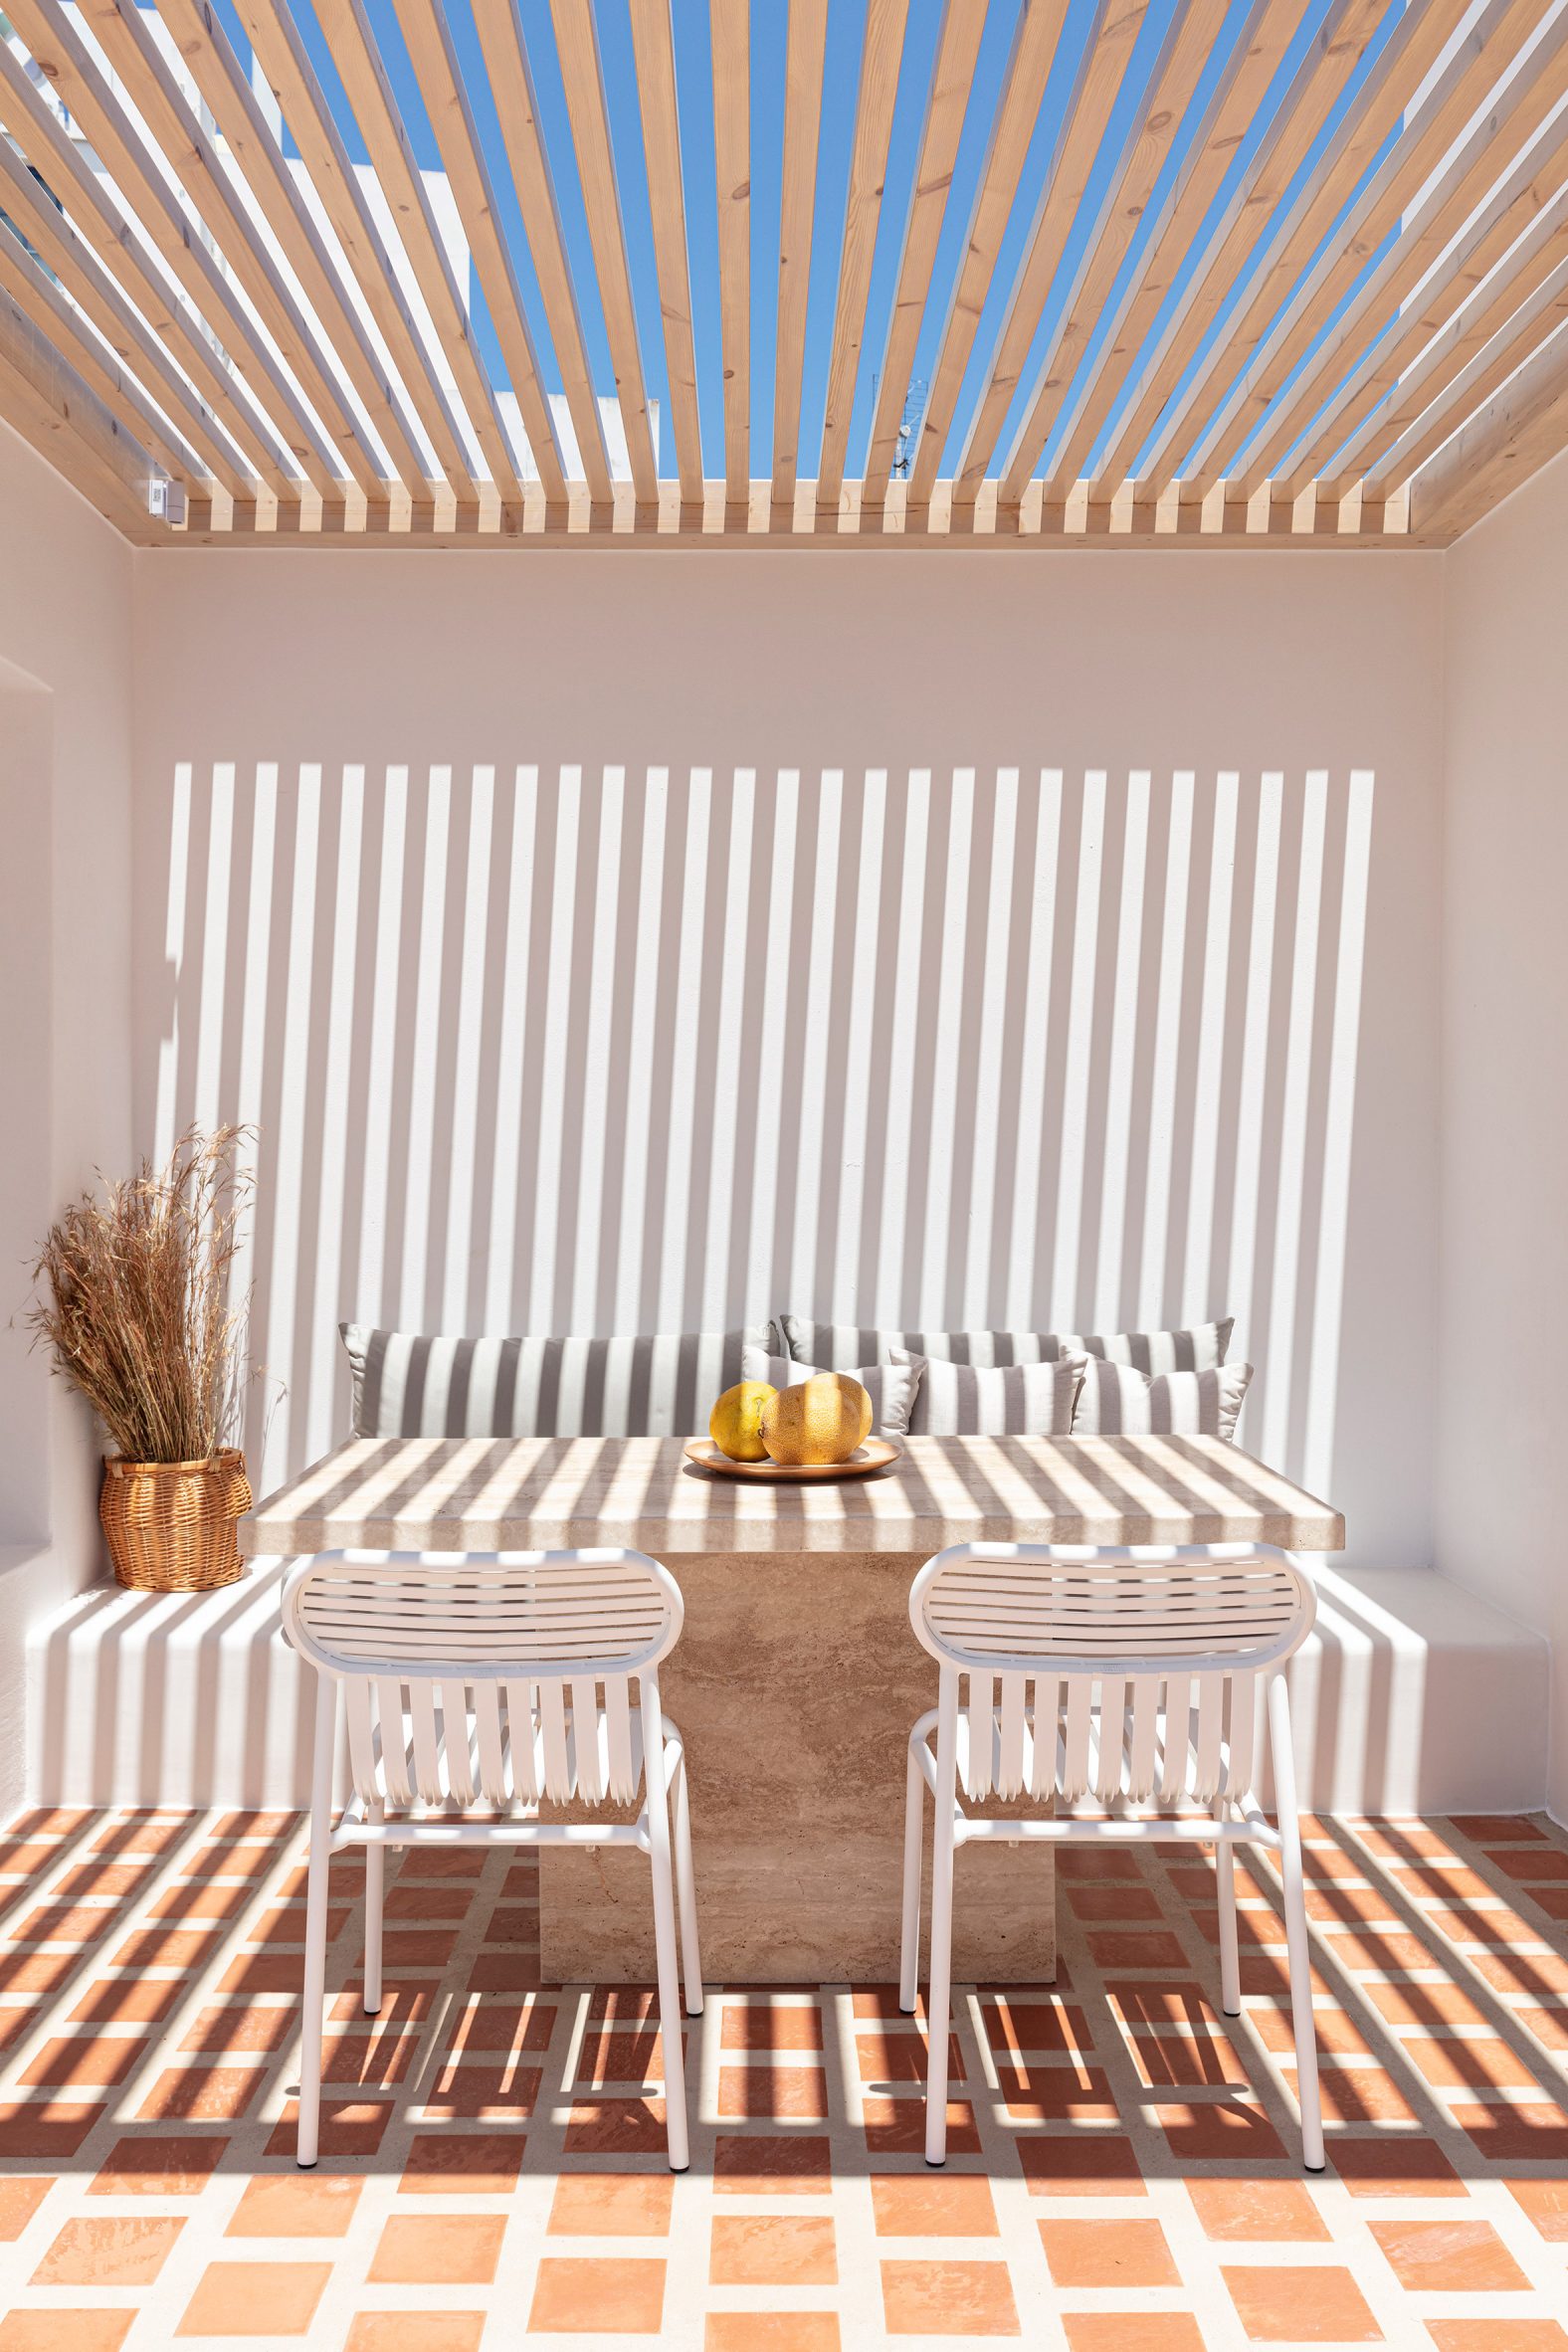 Wooden beams create shadows over the dining area on the terrace